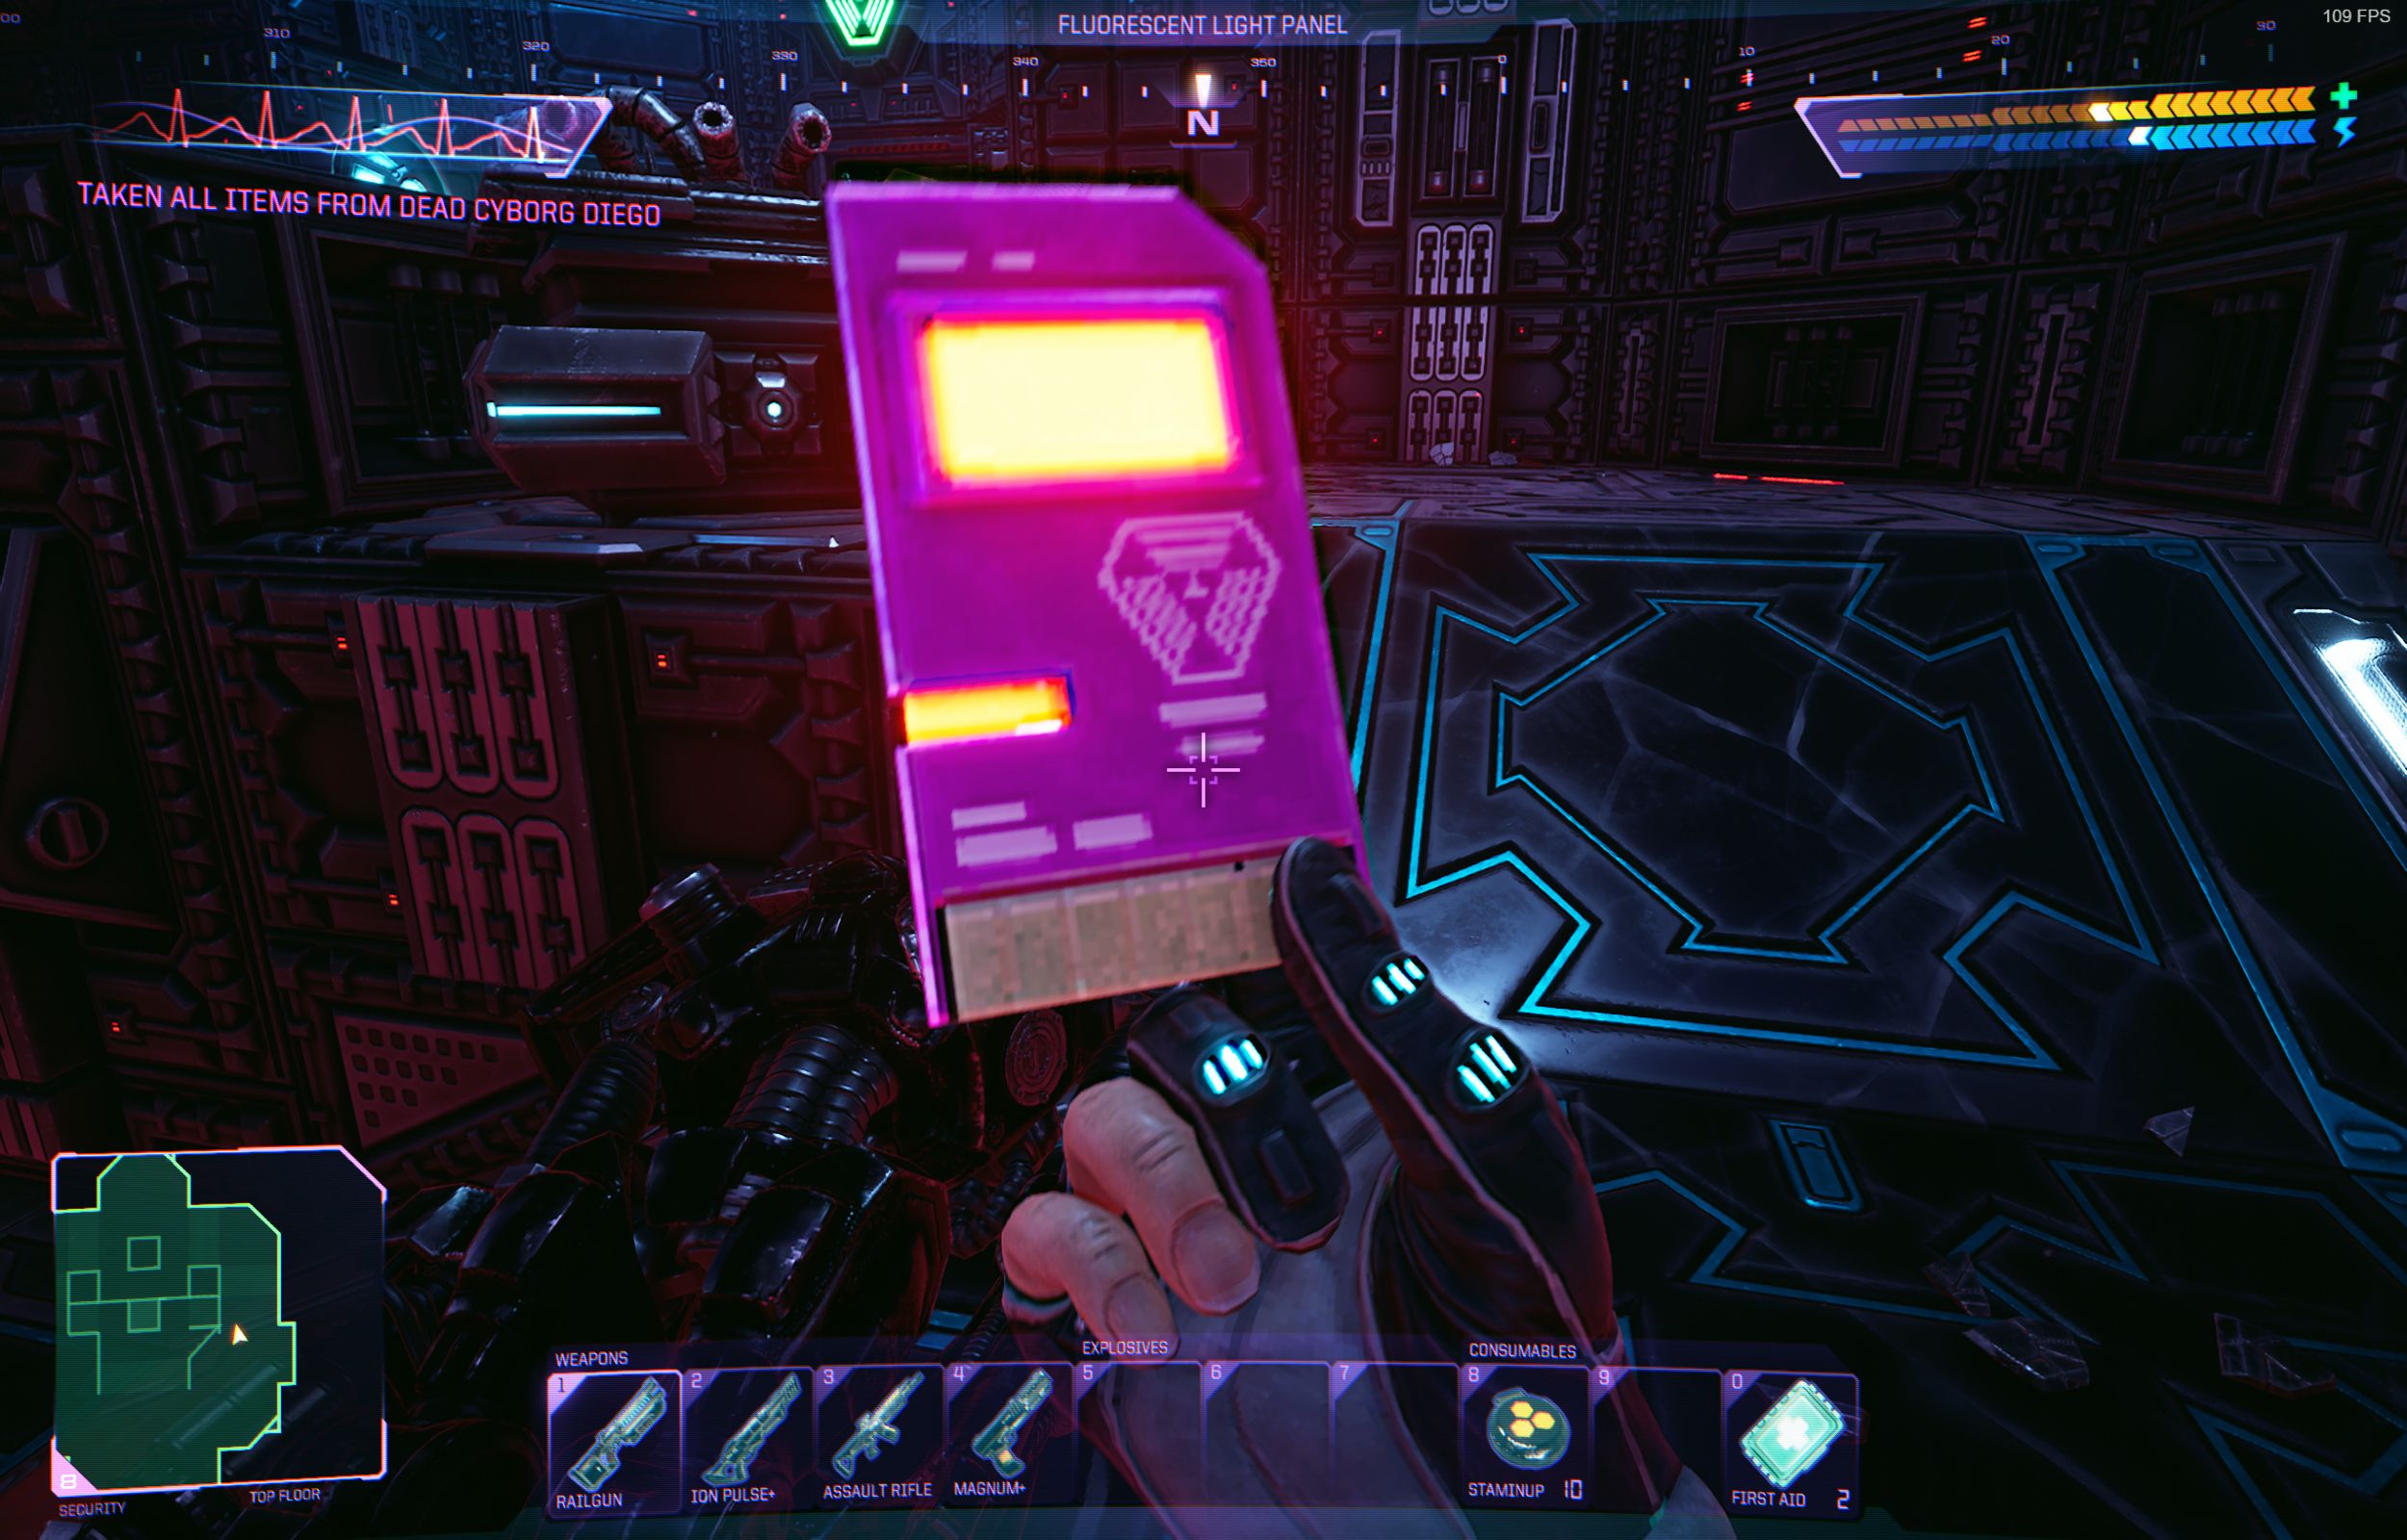 System Shock: Diego dropped the Personal-5 (PER5) access card.